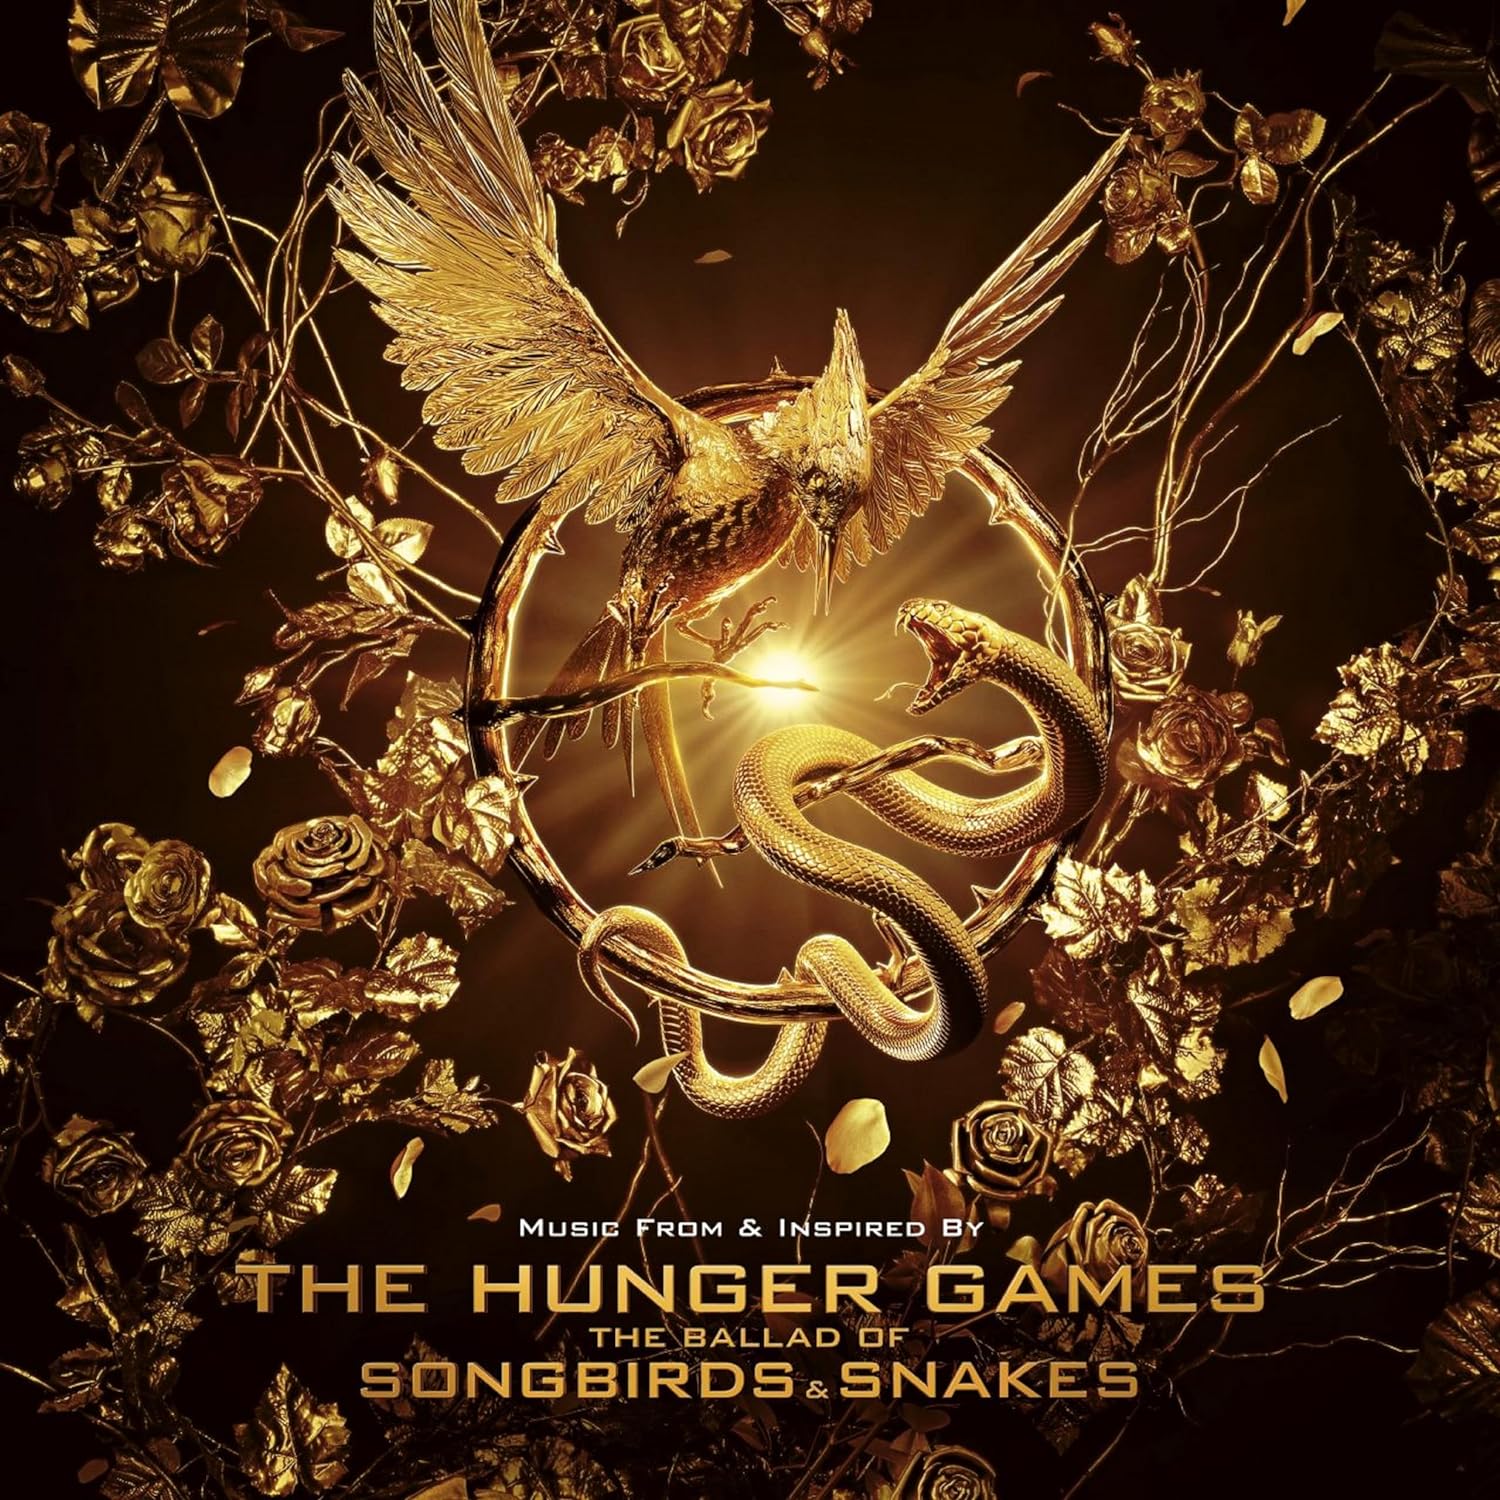 Hunger Games, Ballad Of Songbirds And Snakes